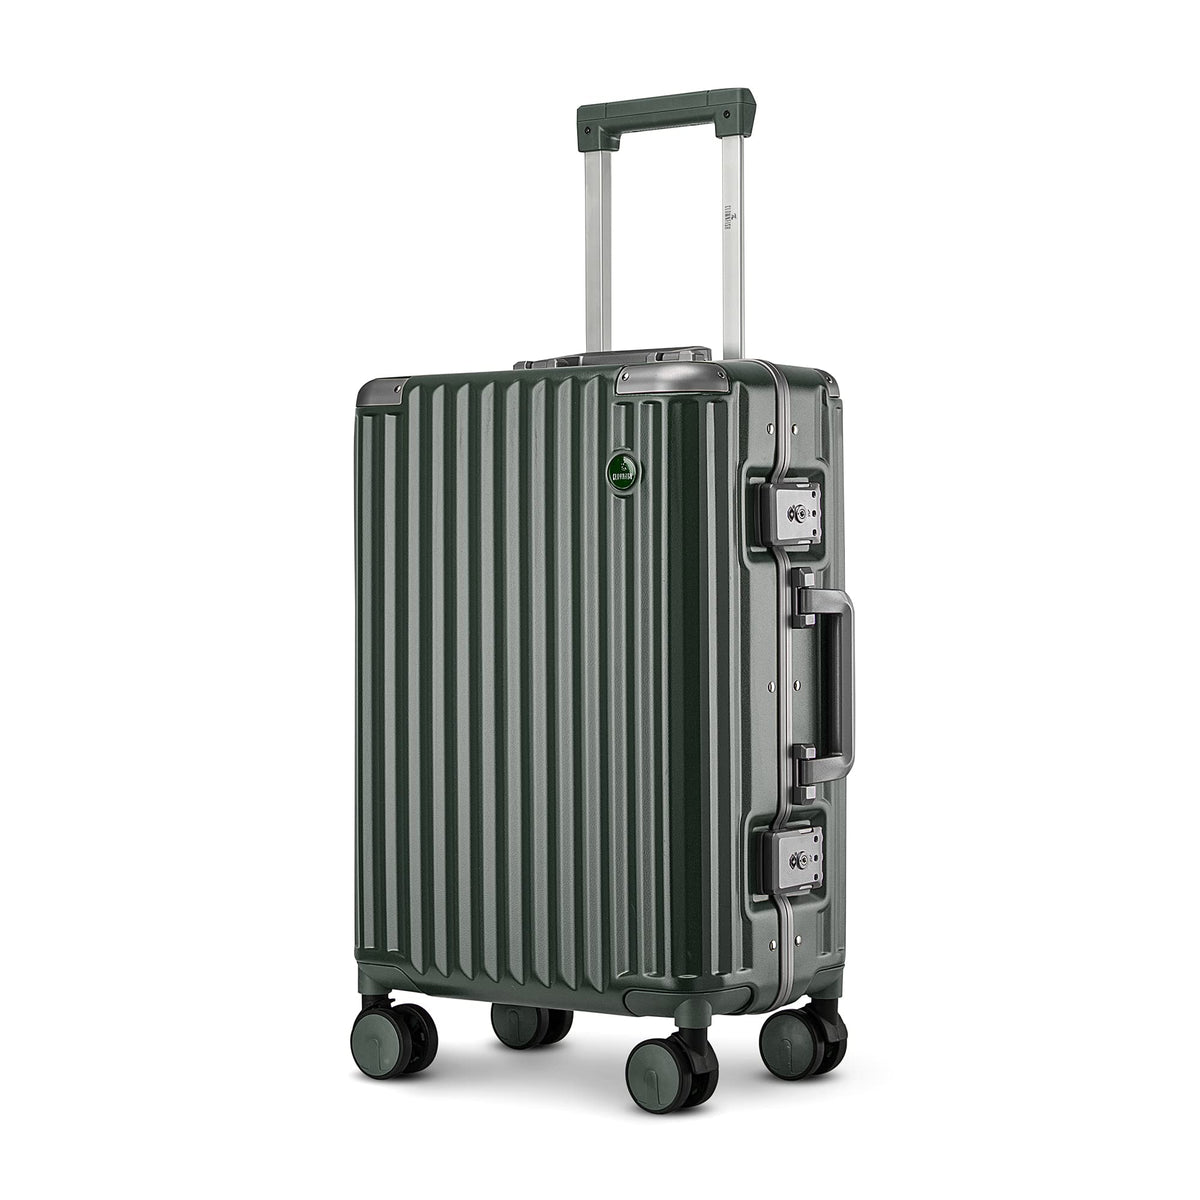 THE CLOWNFISH Stark Series Luggage Polycarbonate Hard Case Suitcase Eight Wheel Trolley Bag with Double TSA Locks- Forest Green (Small Size, 57 cm-22 inch)